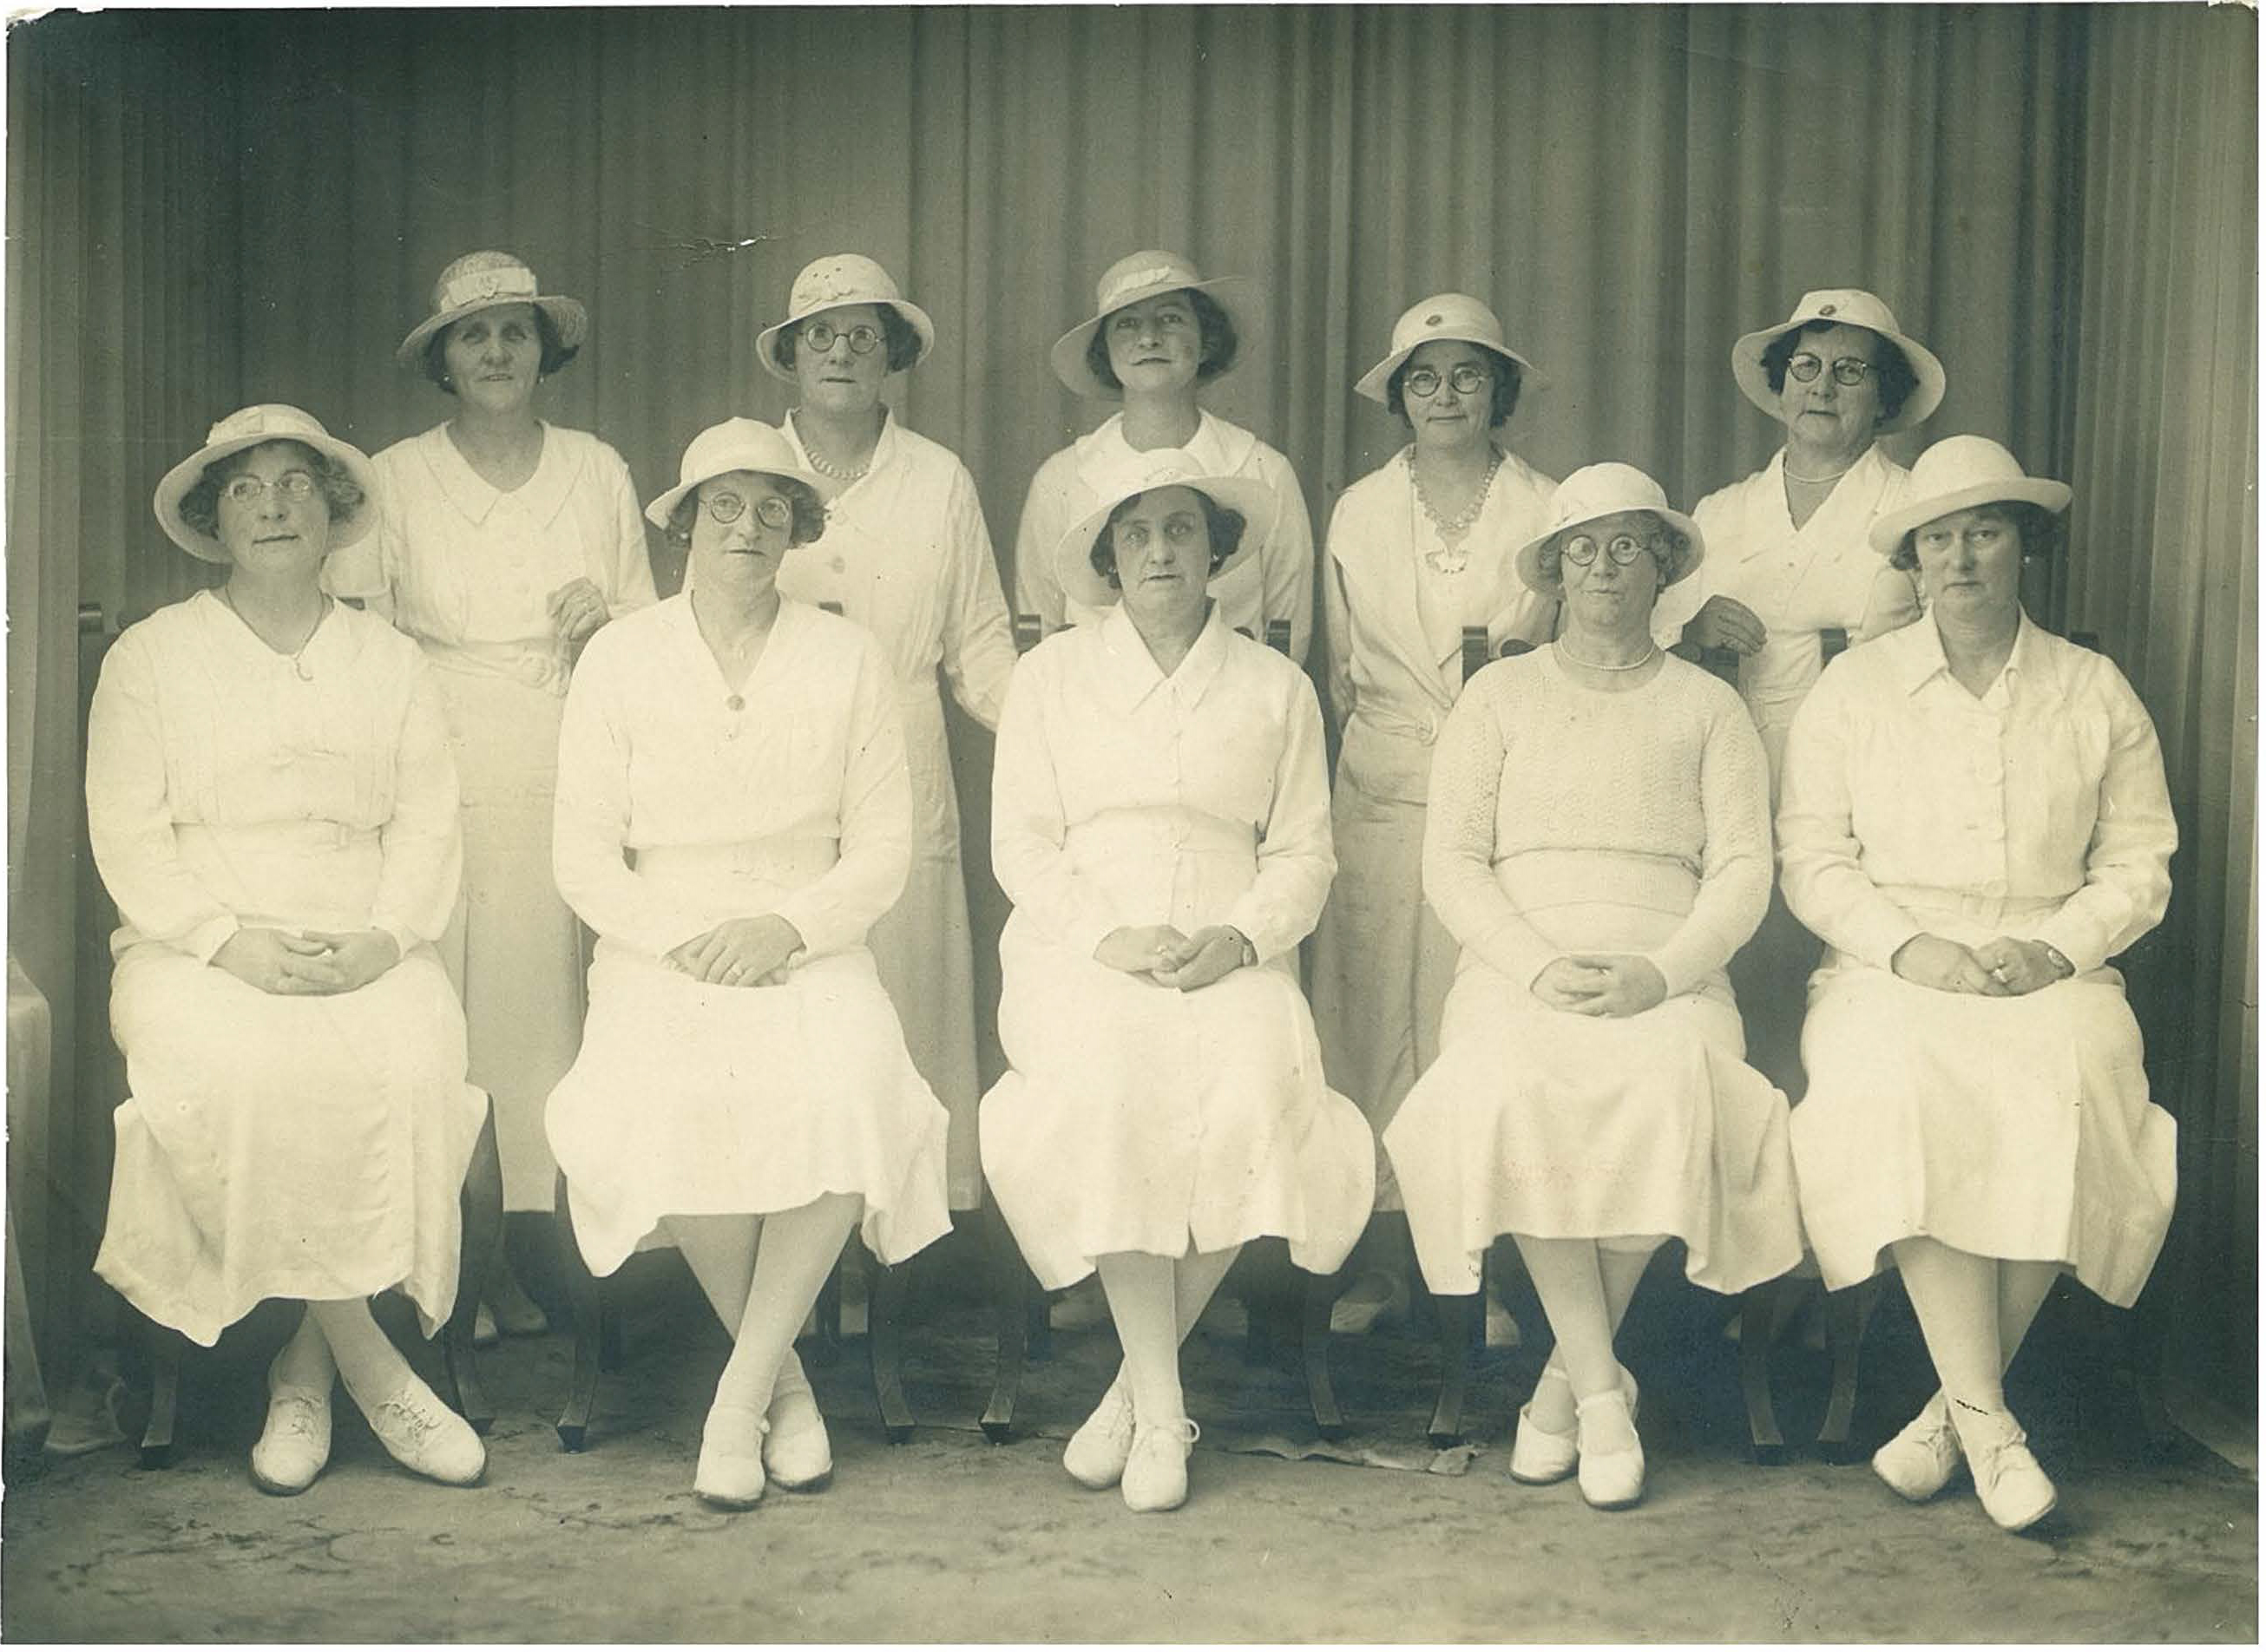 Auburn Bowlers from 1930